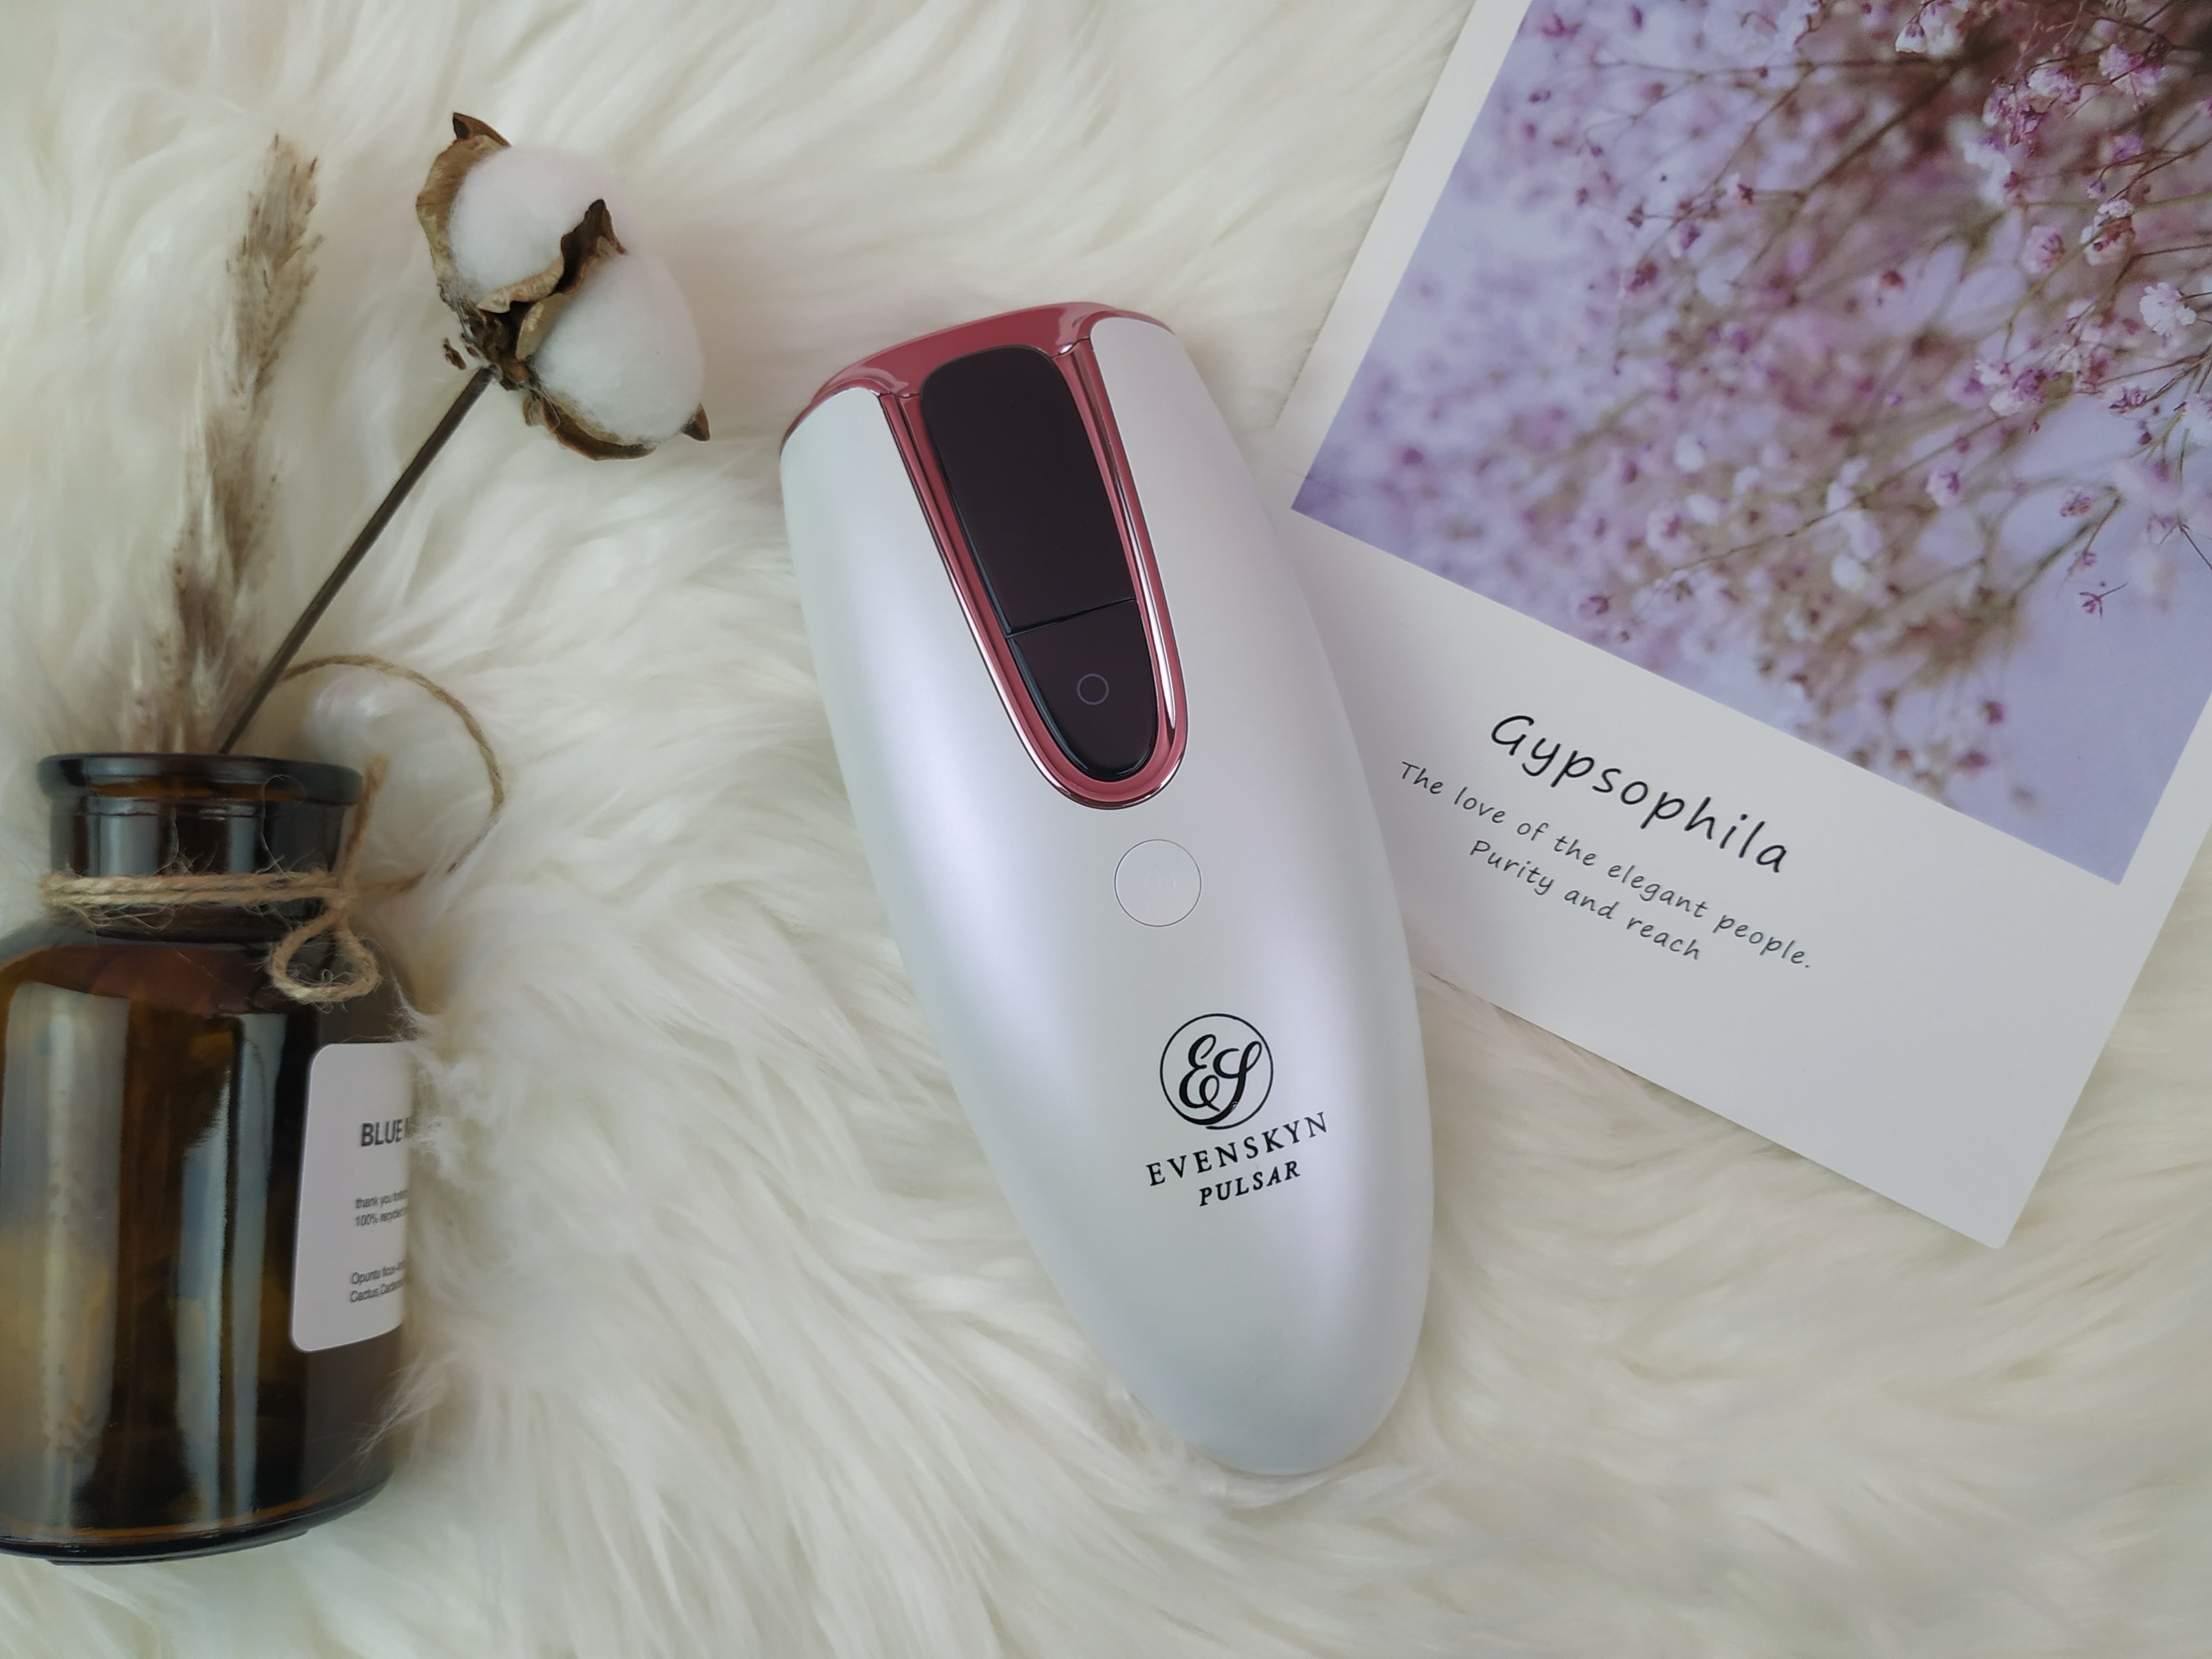 Benefits of IPL Laser hair removal at home and why the IPL intensity of the handset matters